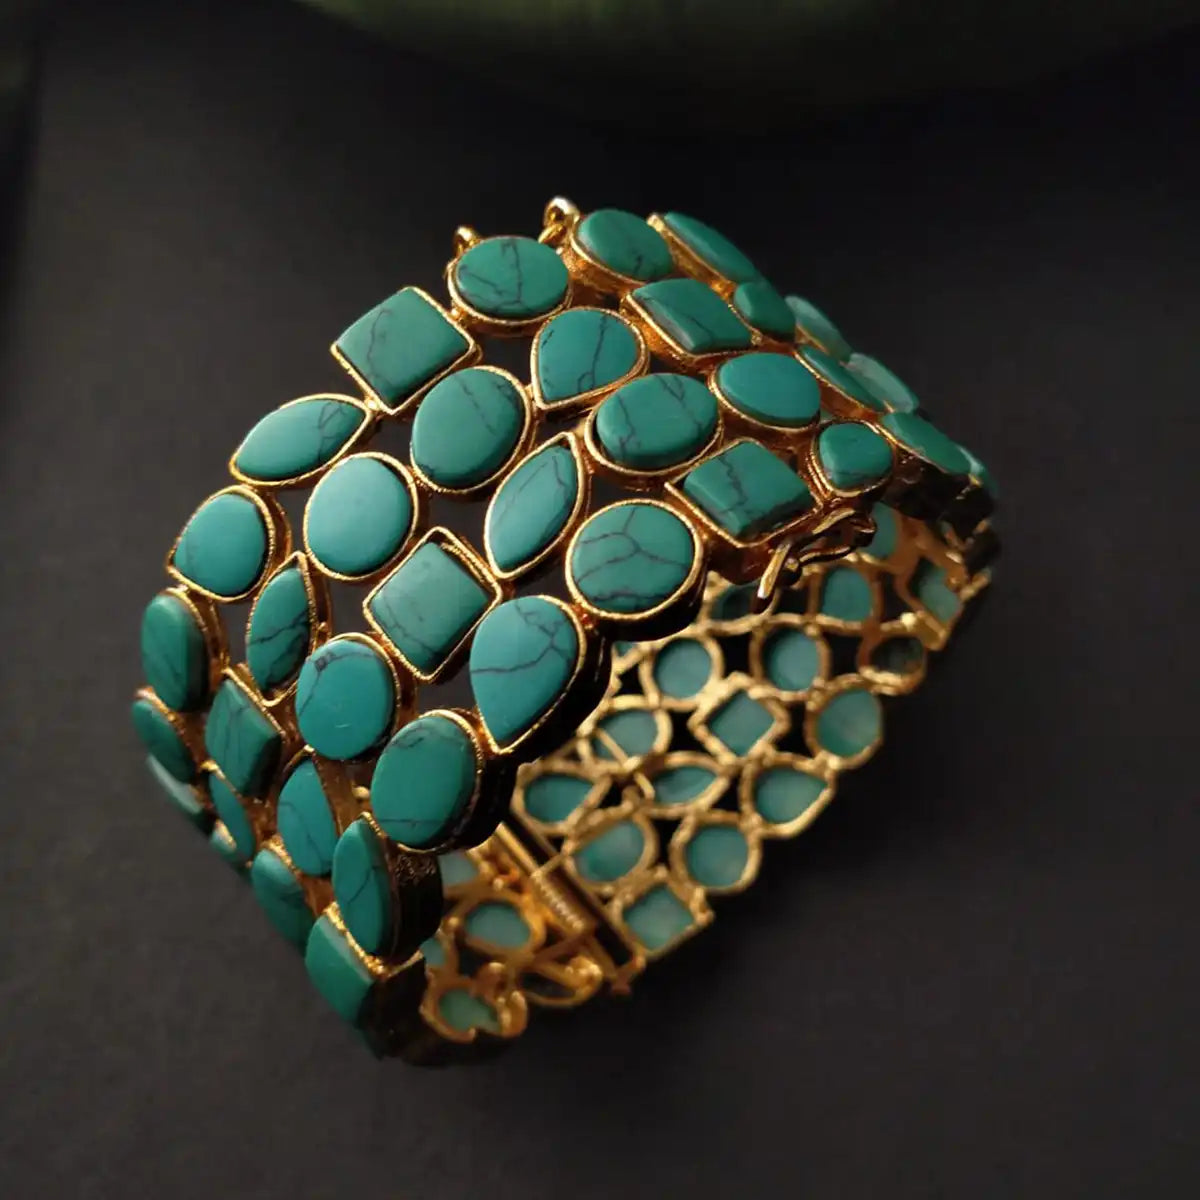 stone bangles designs with price njc-013 turquoise